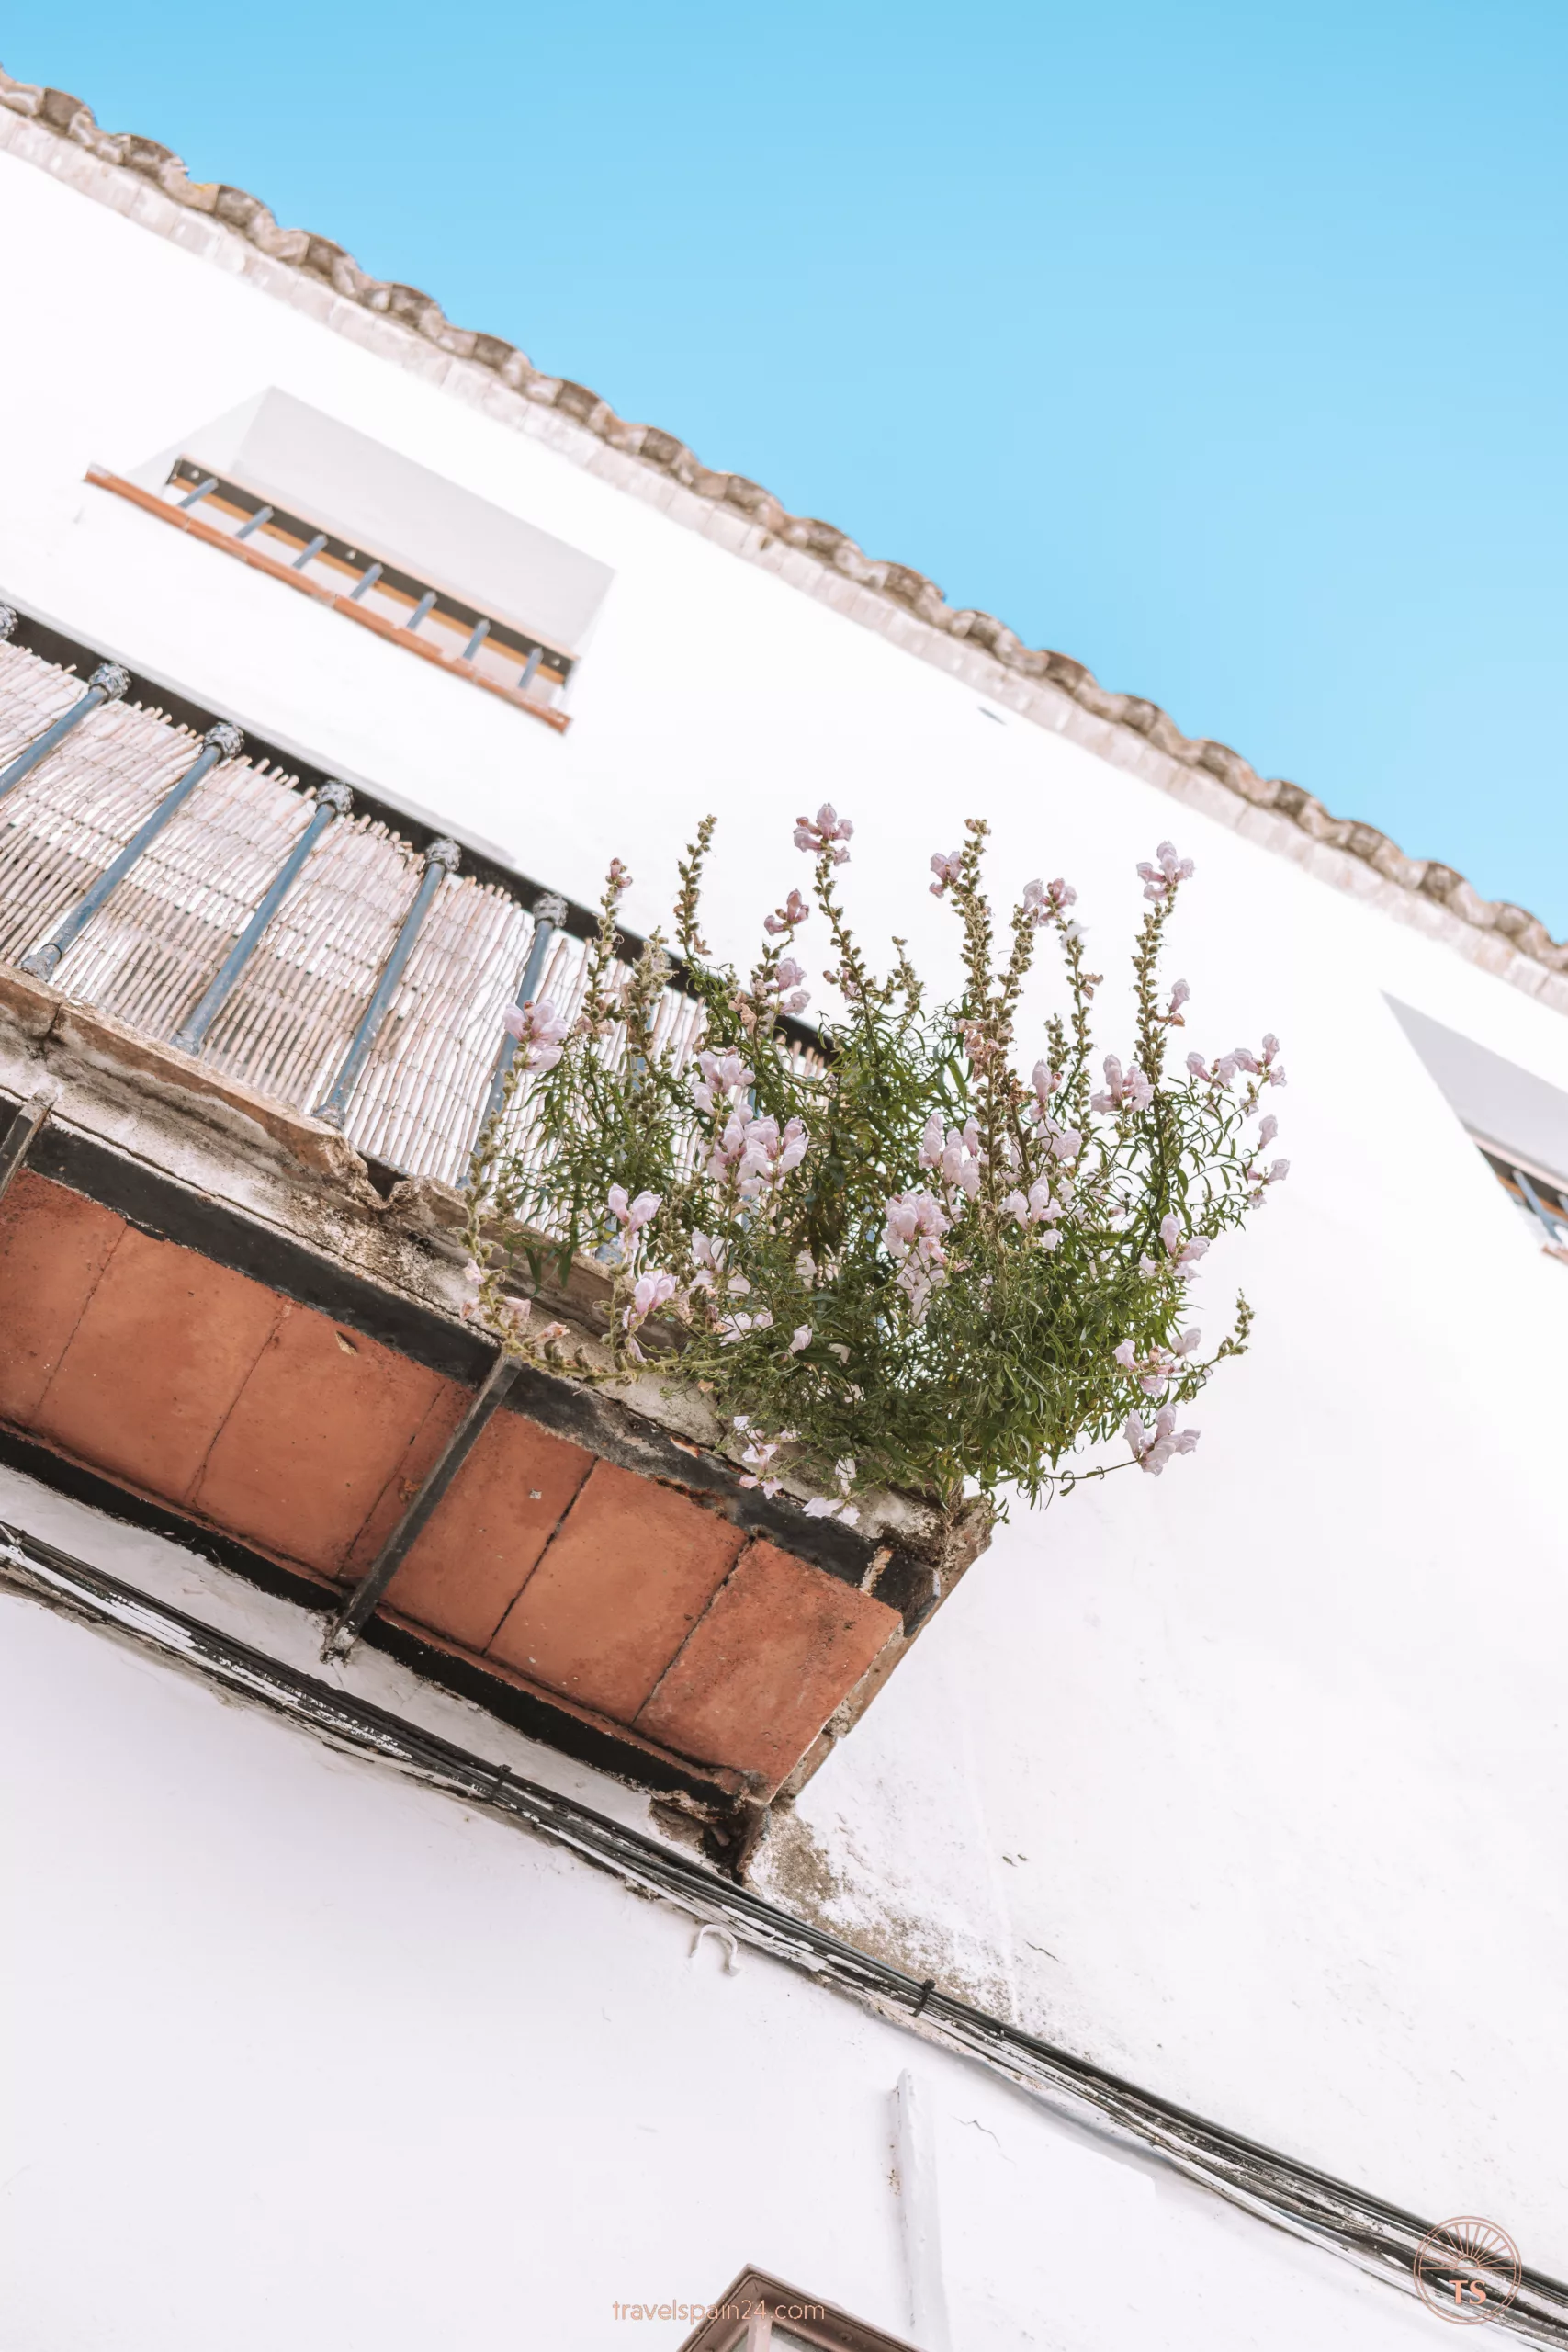 A charming balcony in Arcos de la Frontera, captured from below, adorned with flowers. The bright white walls contrast with the green branches and pink flowers.